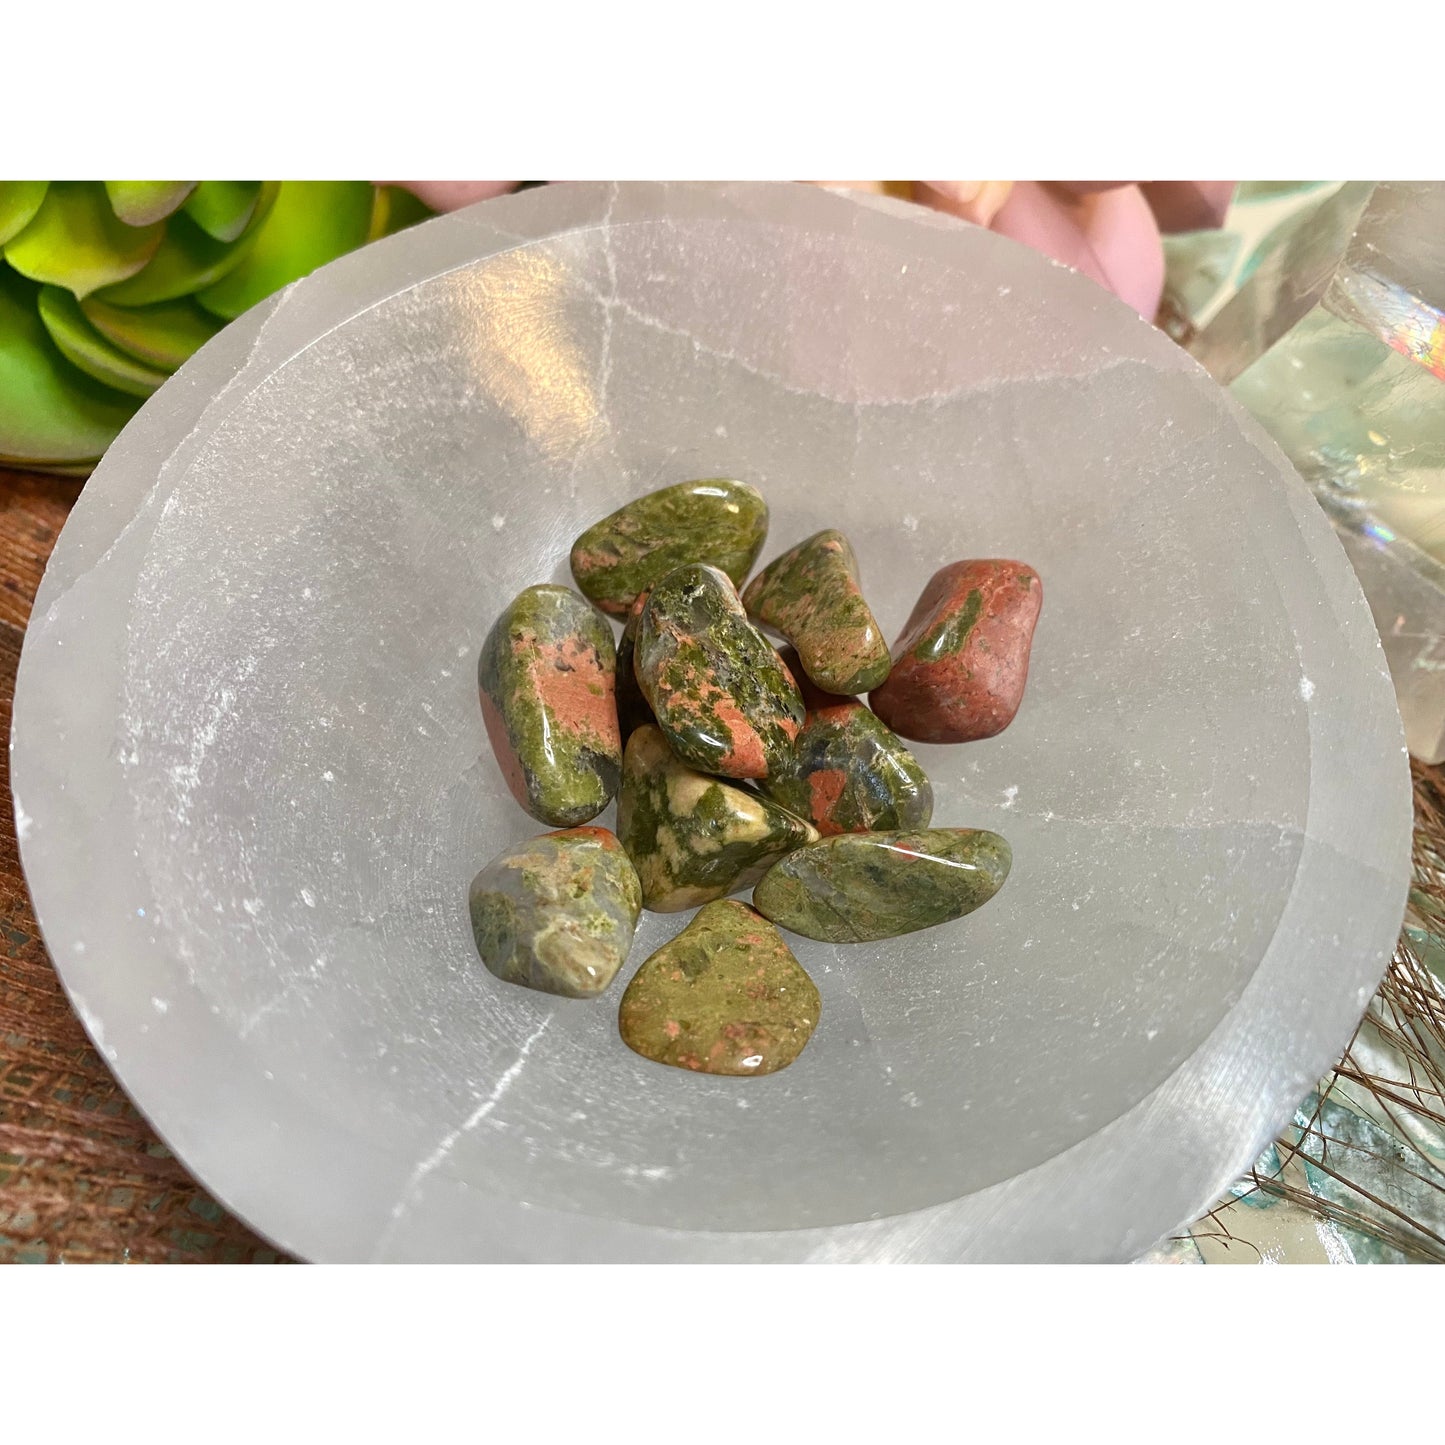 Unakite tumbled stone to clarify your vision!